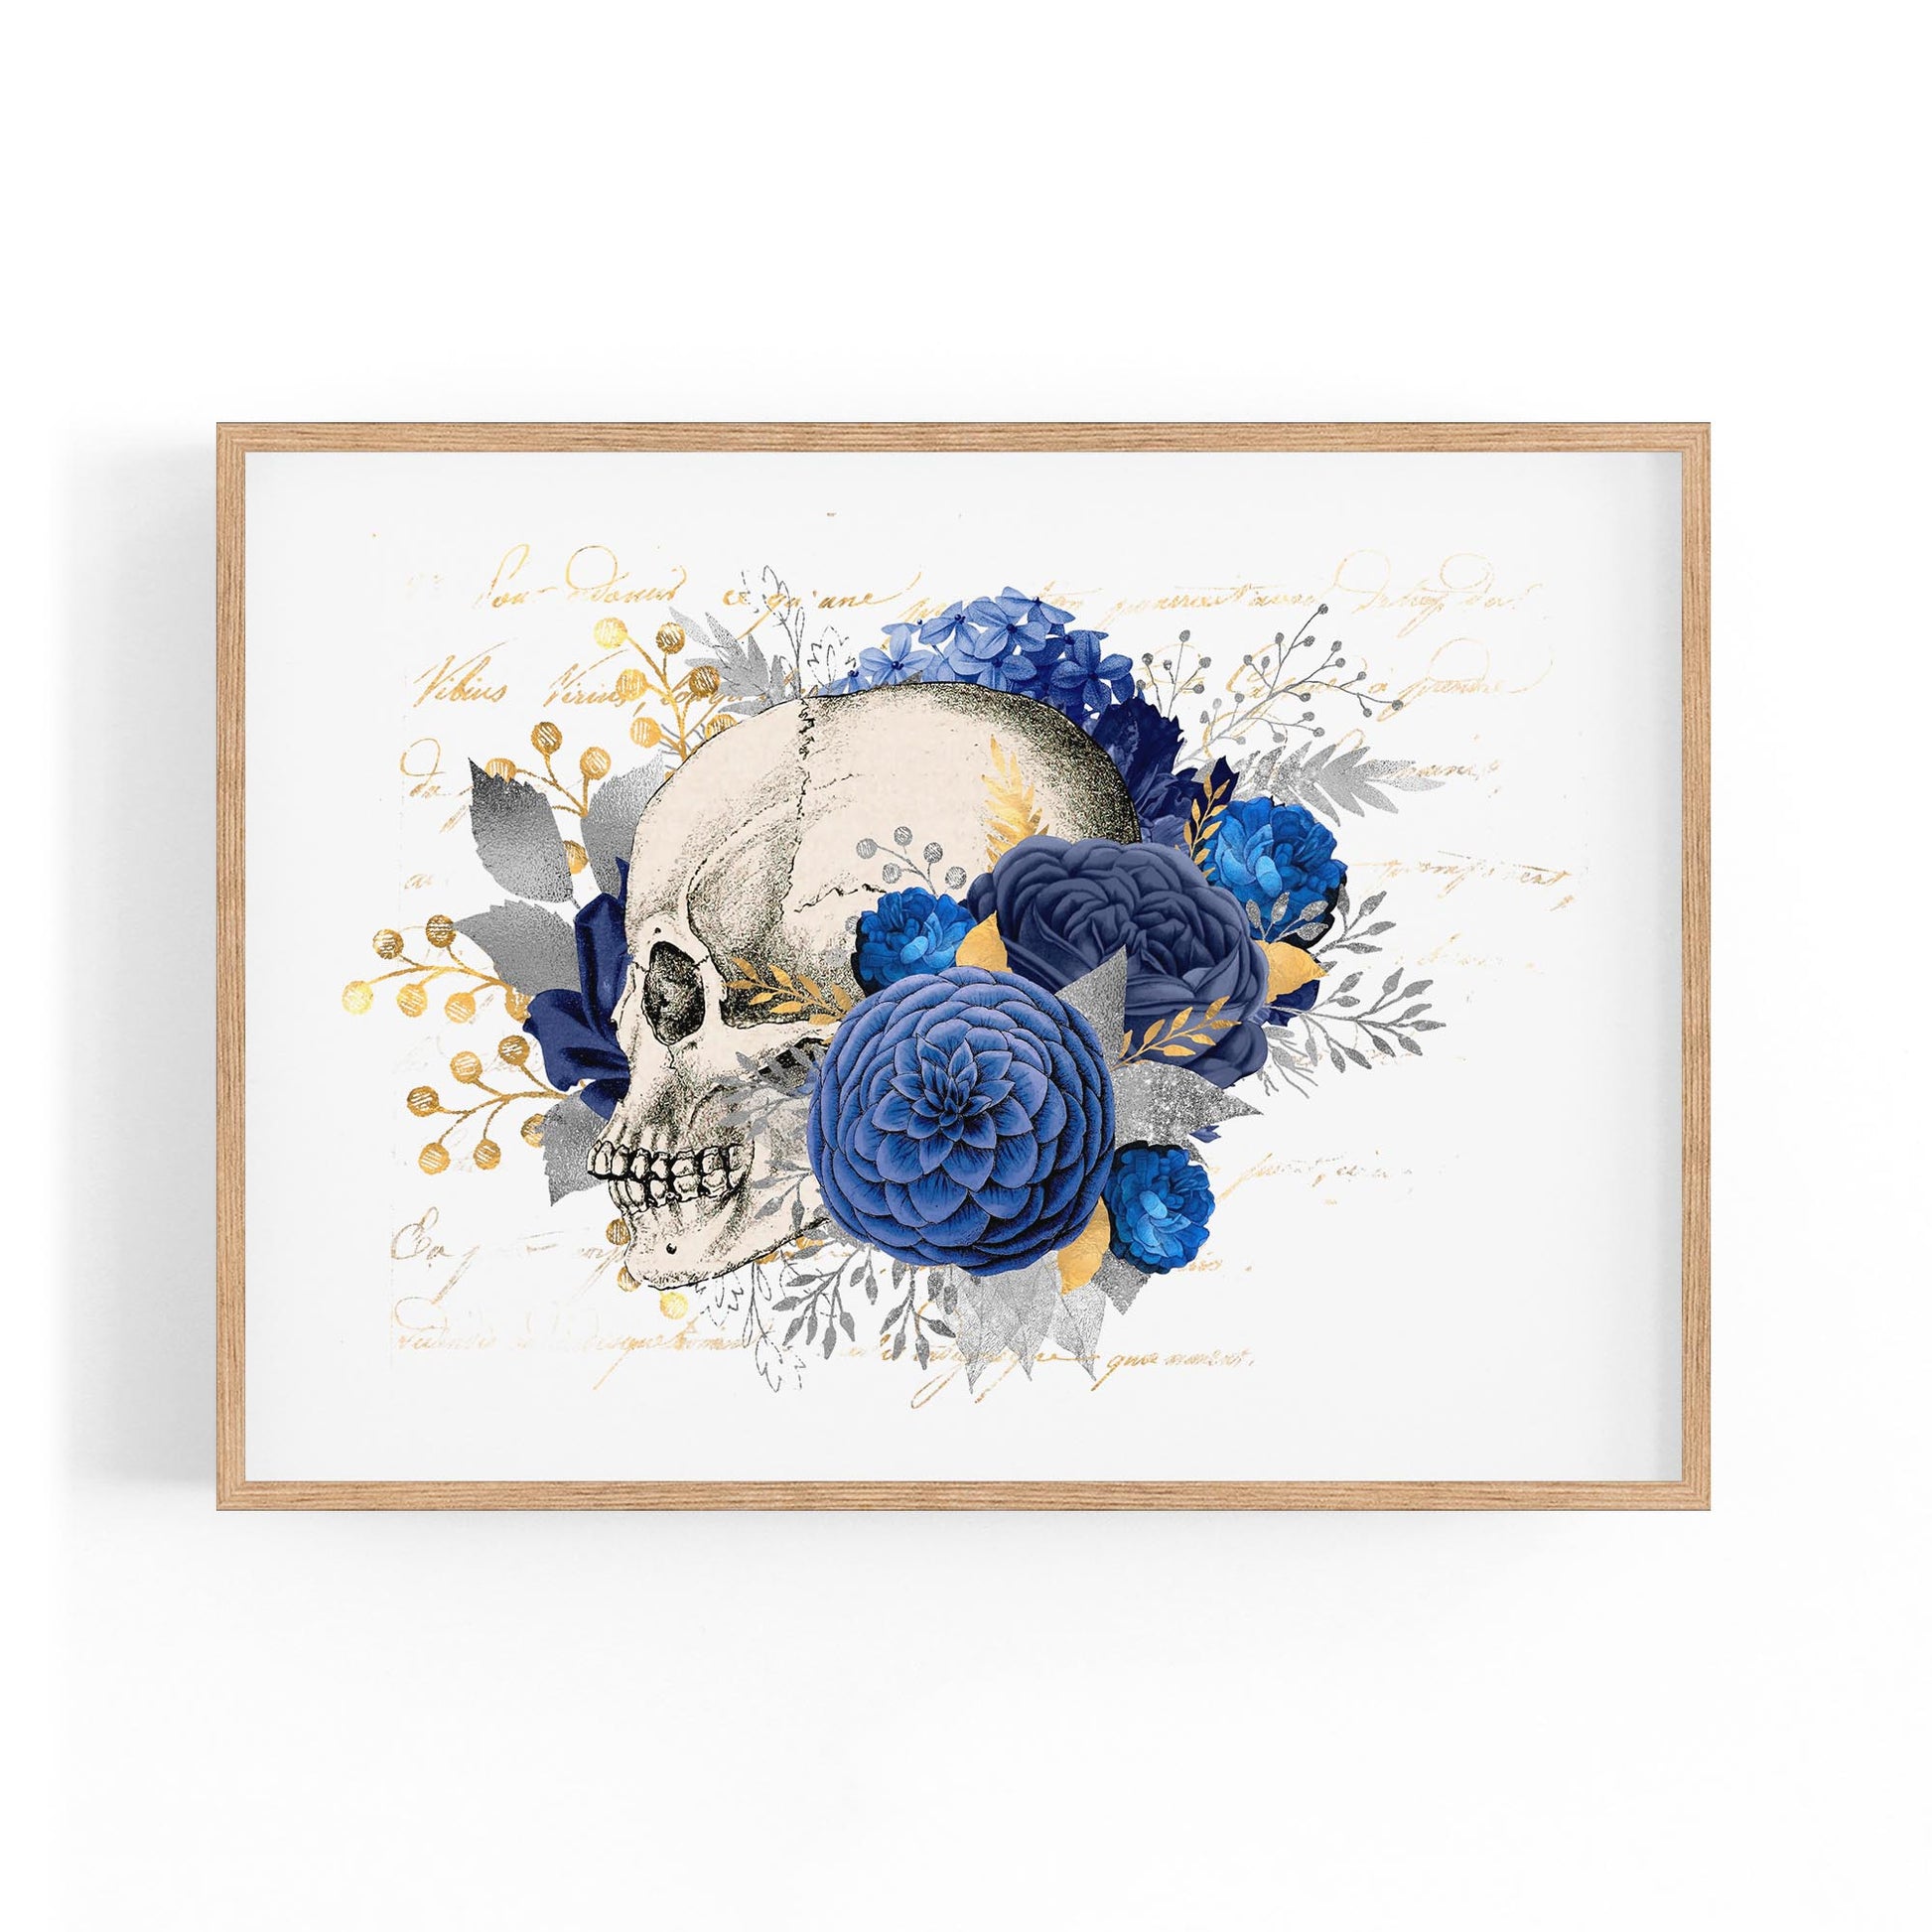 Blue Floral Skull Fashion Girls Bedroom Wall Art #1 - The Affordable Art Company